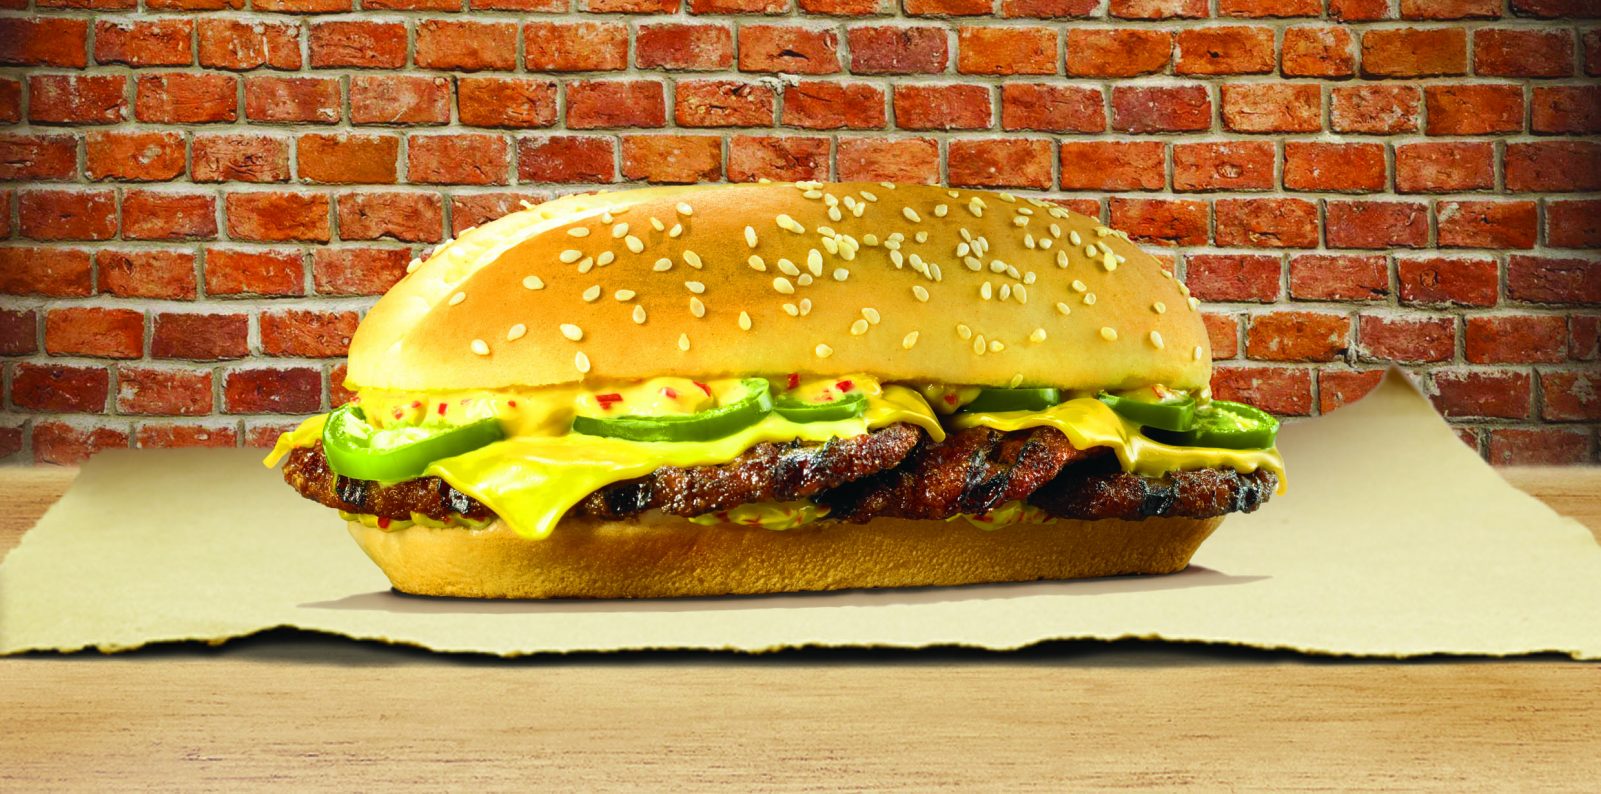 🍔 Feast on Fast Food Around the World and We’ll Reveal What Age You Will Live to Chili Cheese X tra Long Burger